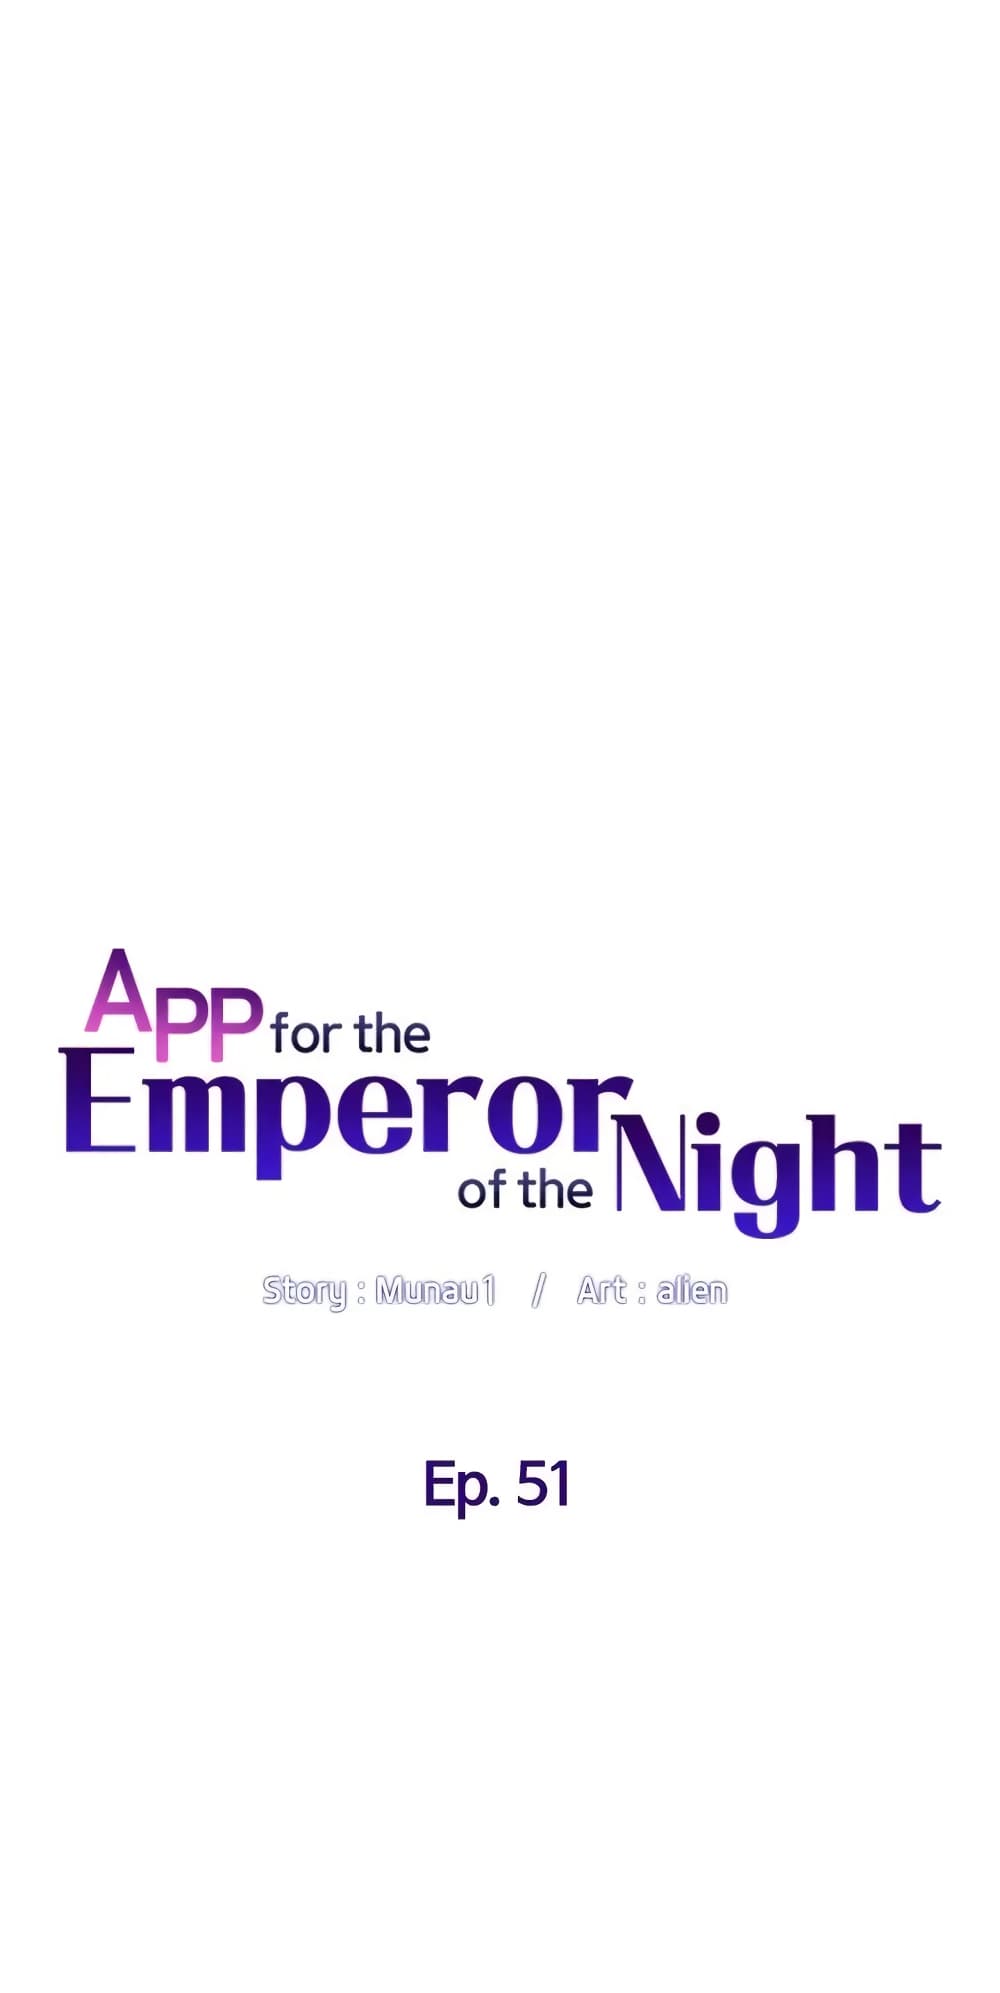 APP for the Emperor of the Night 51-51